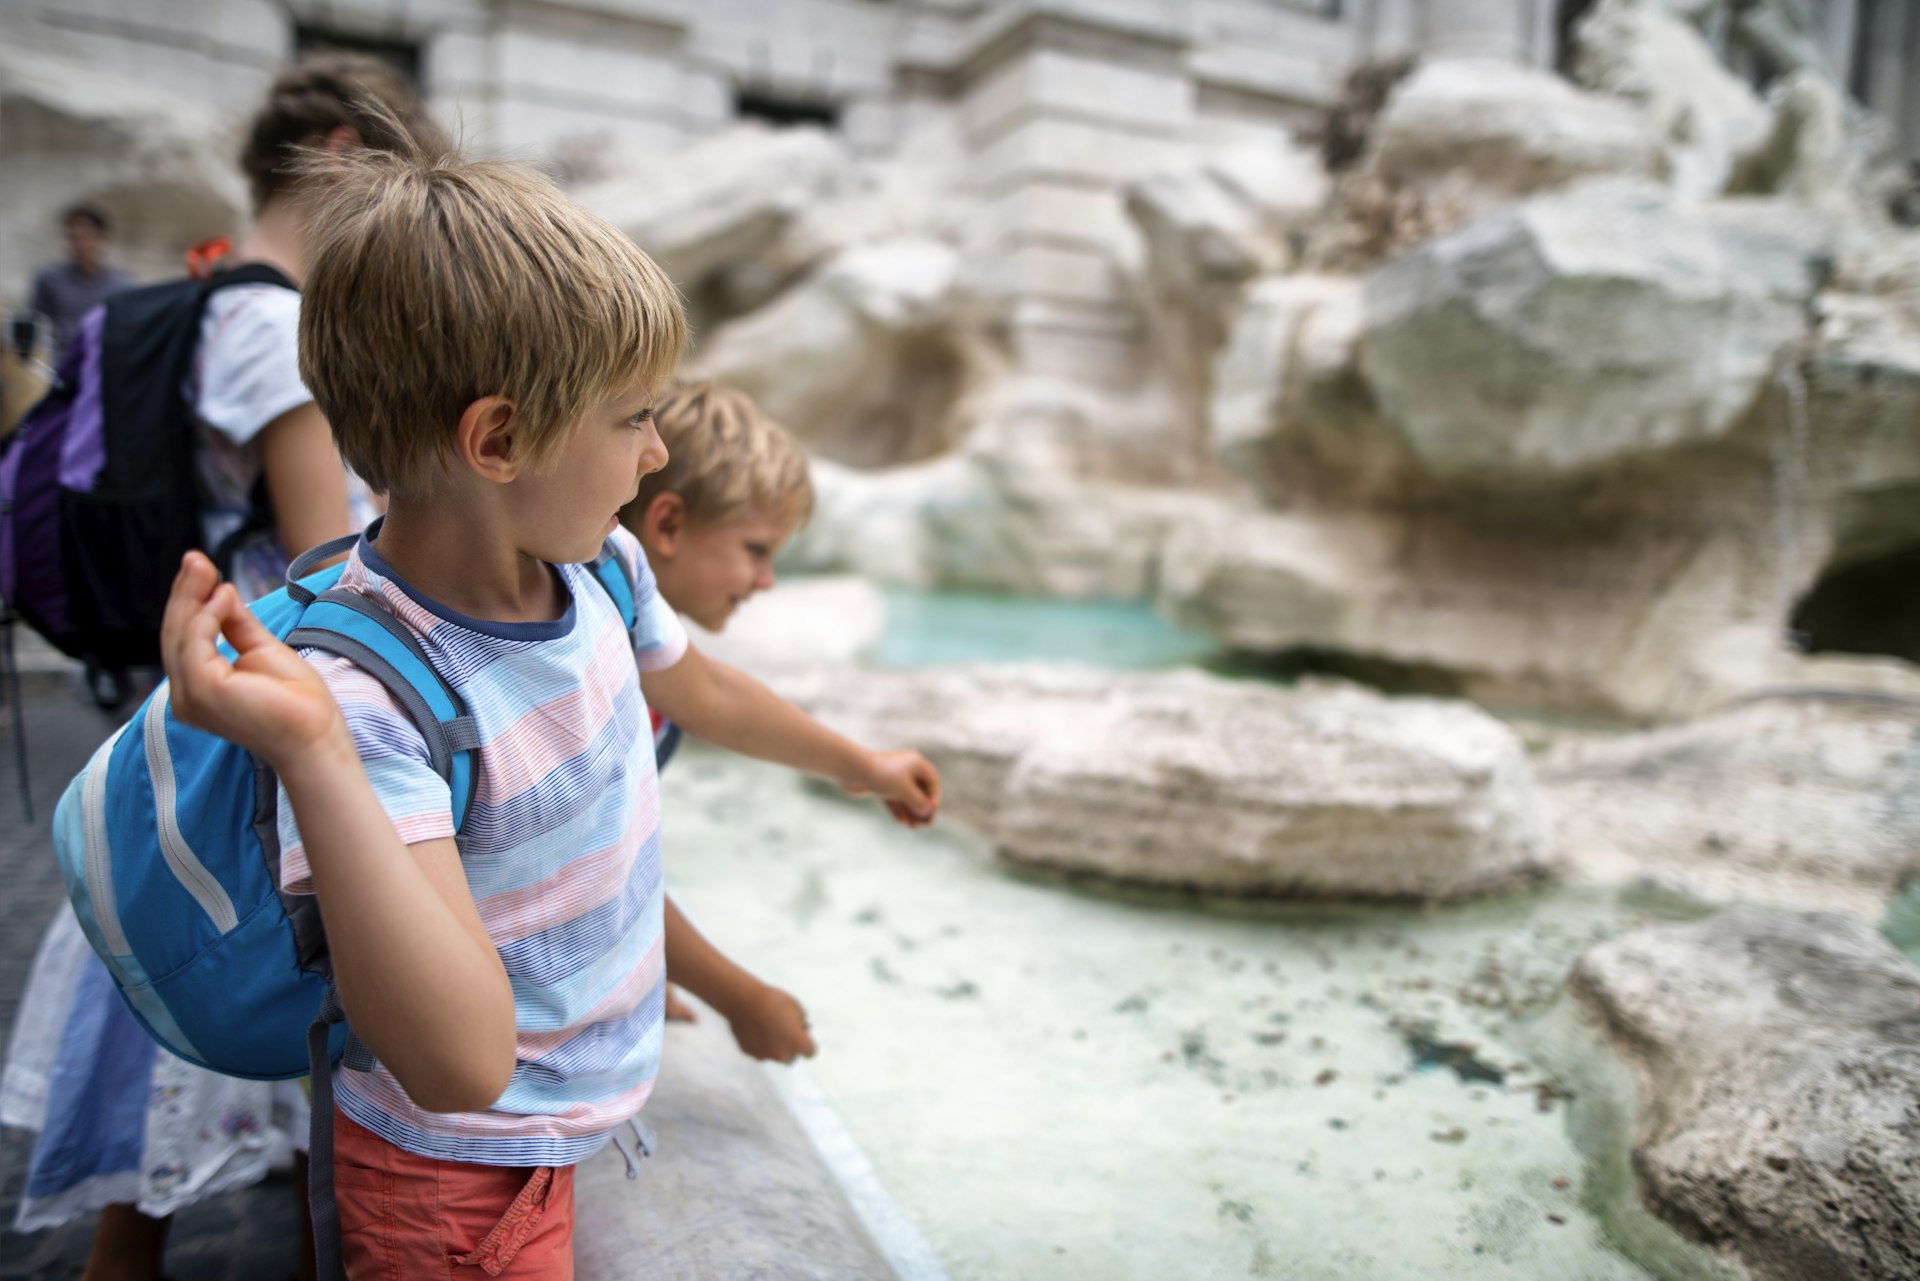 Kids tourists throwing coins into Trevi Fountain, Rome